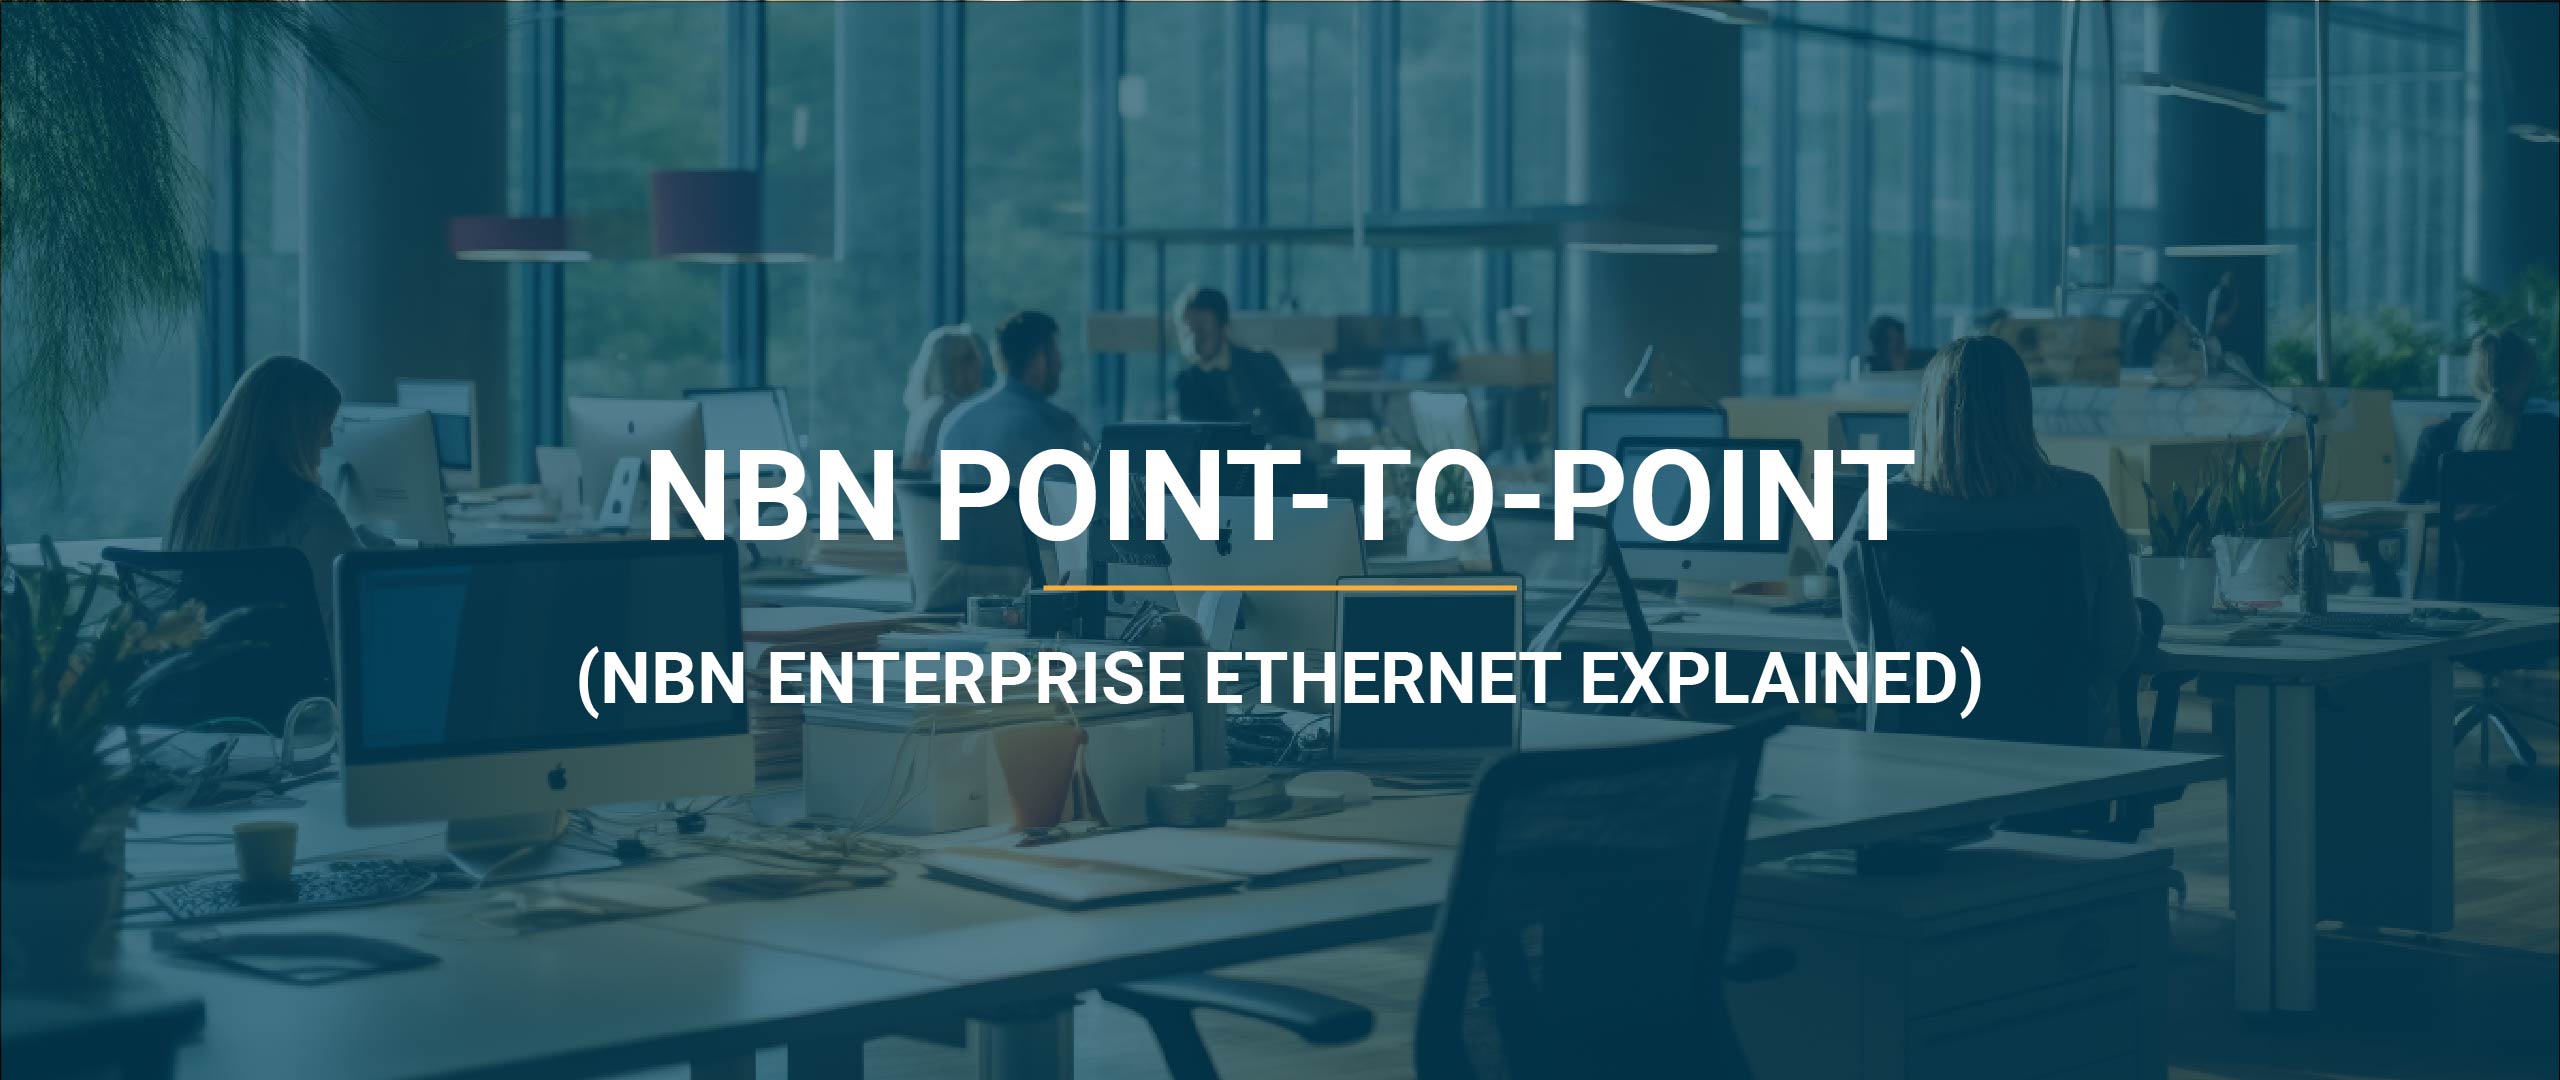 NBN point-to-point